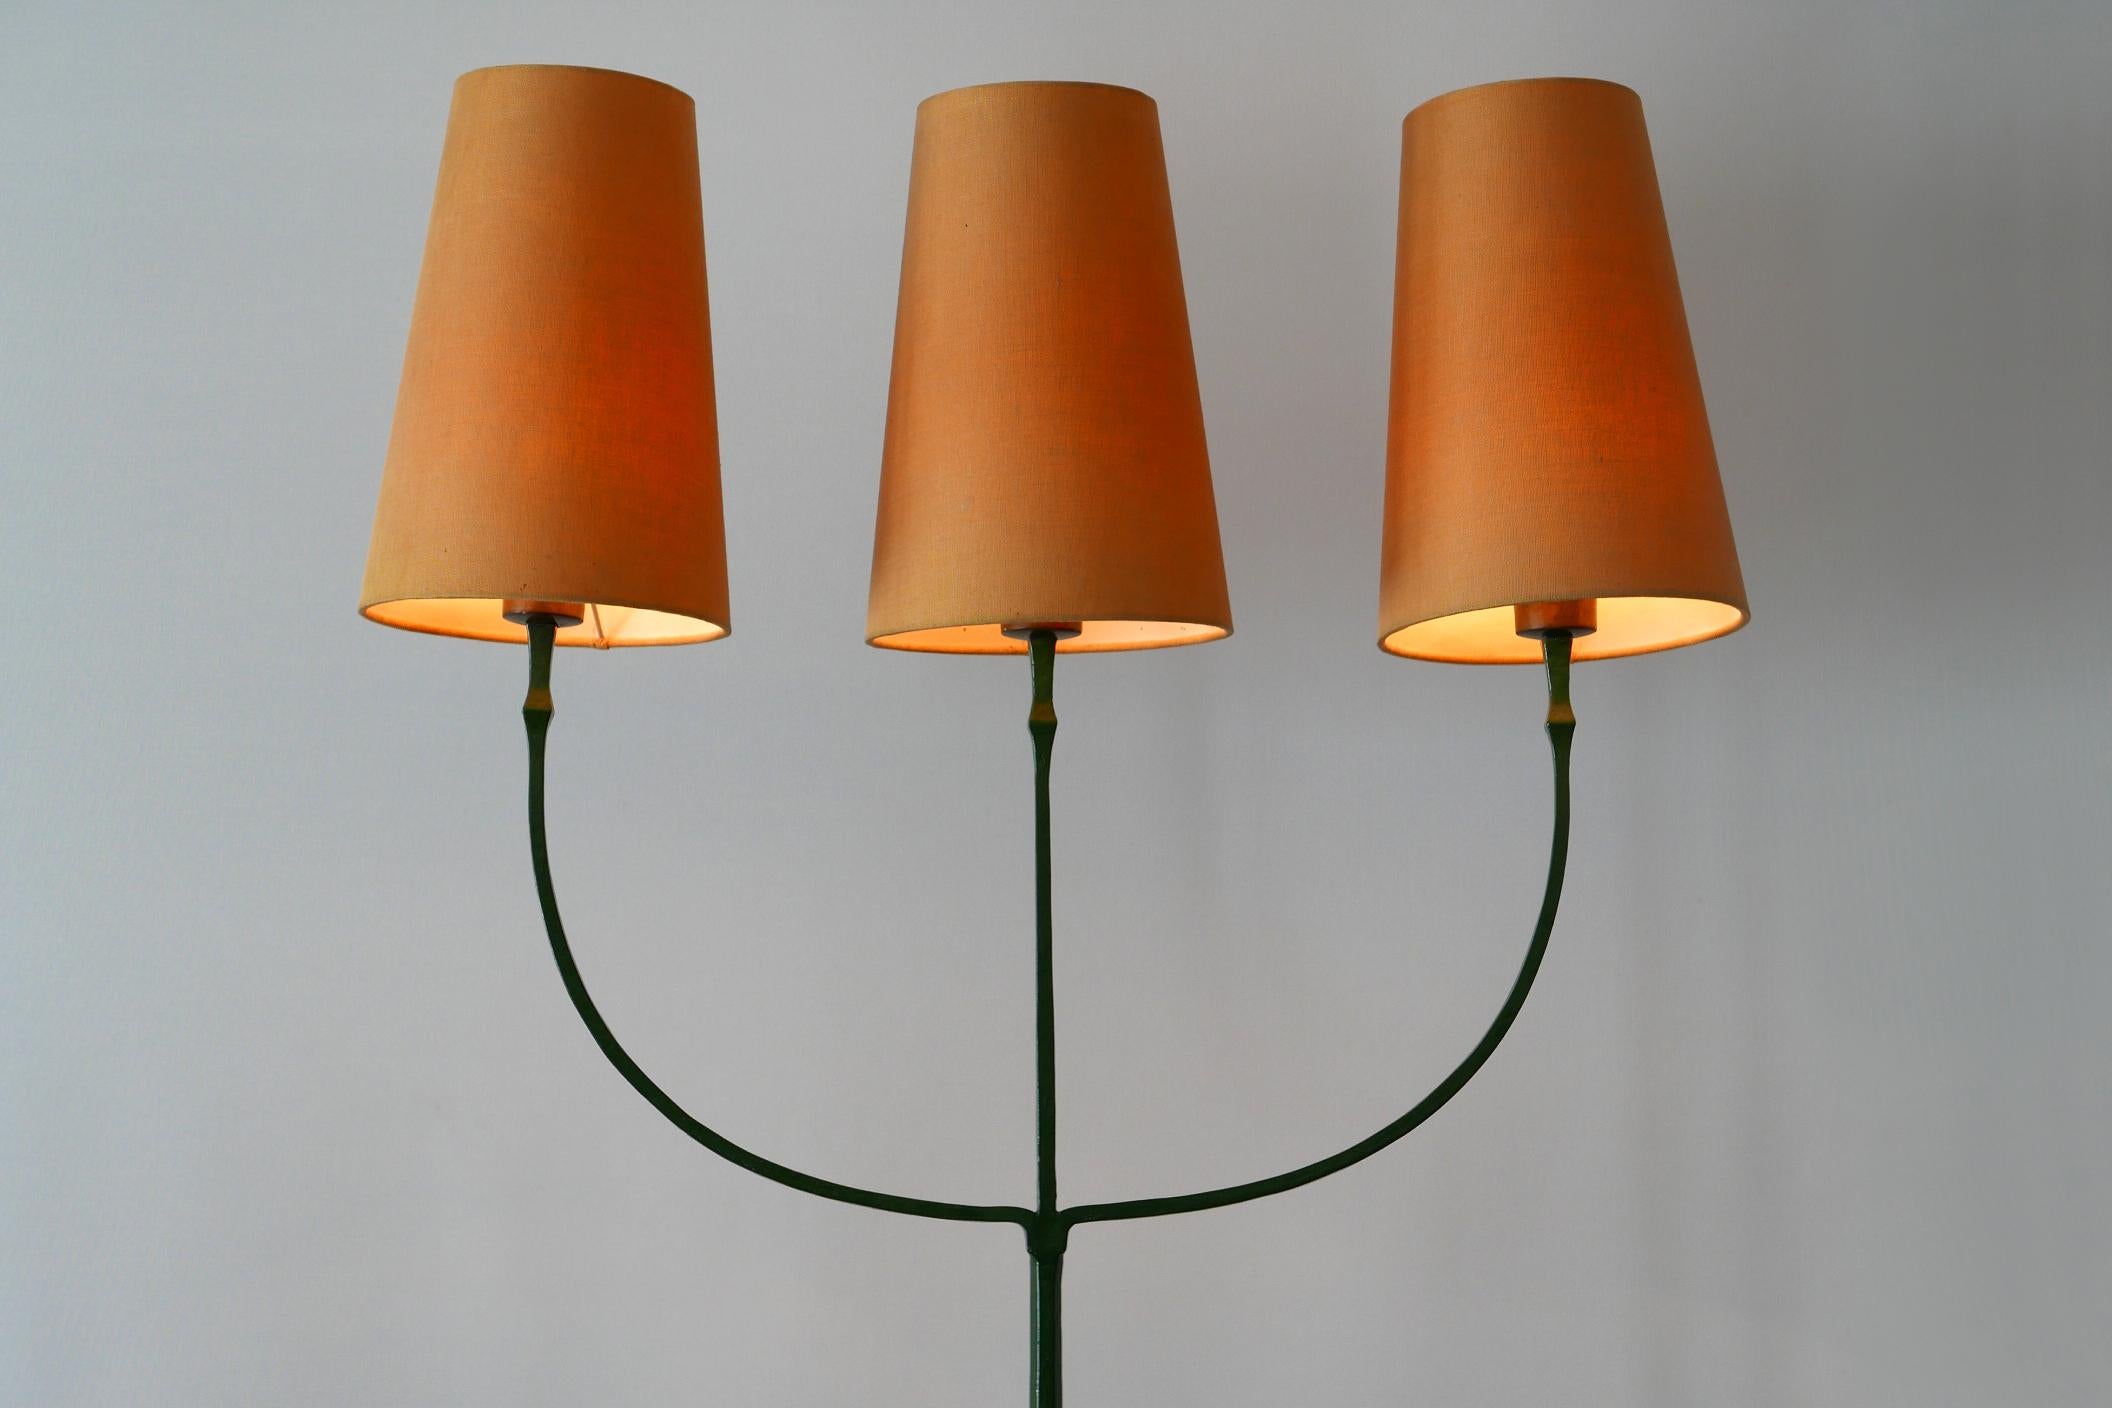 Exceptional Mid-Century Modern Three Flamed Floor Lamp, 1950s For Sale 1